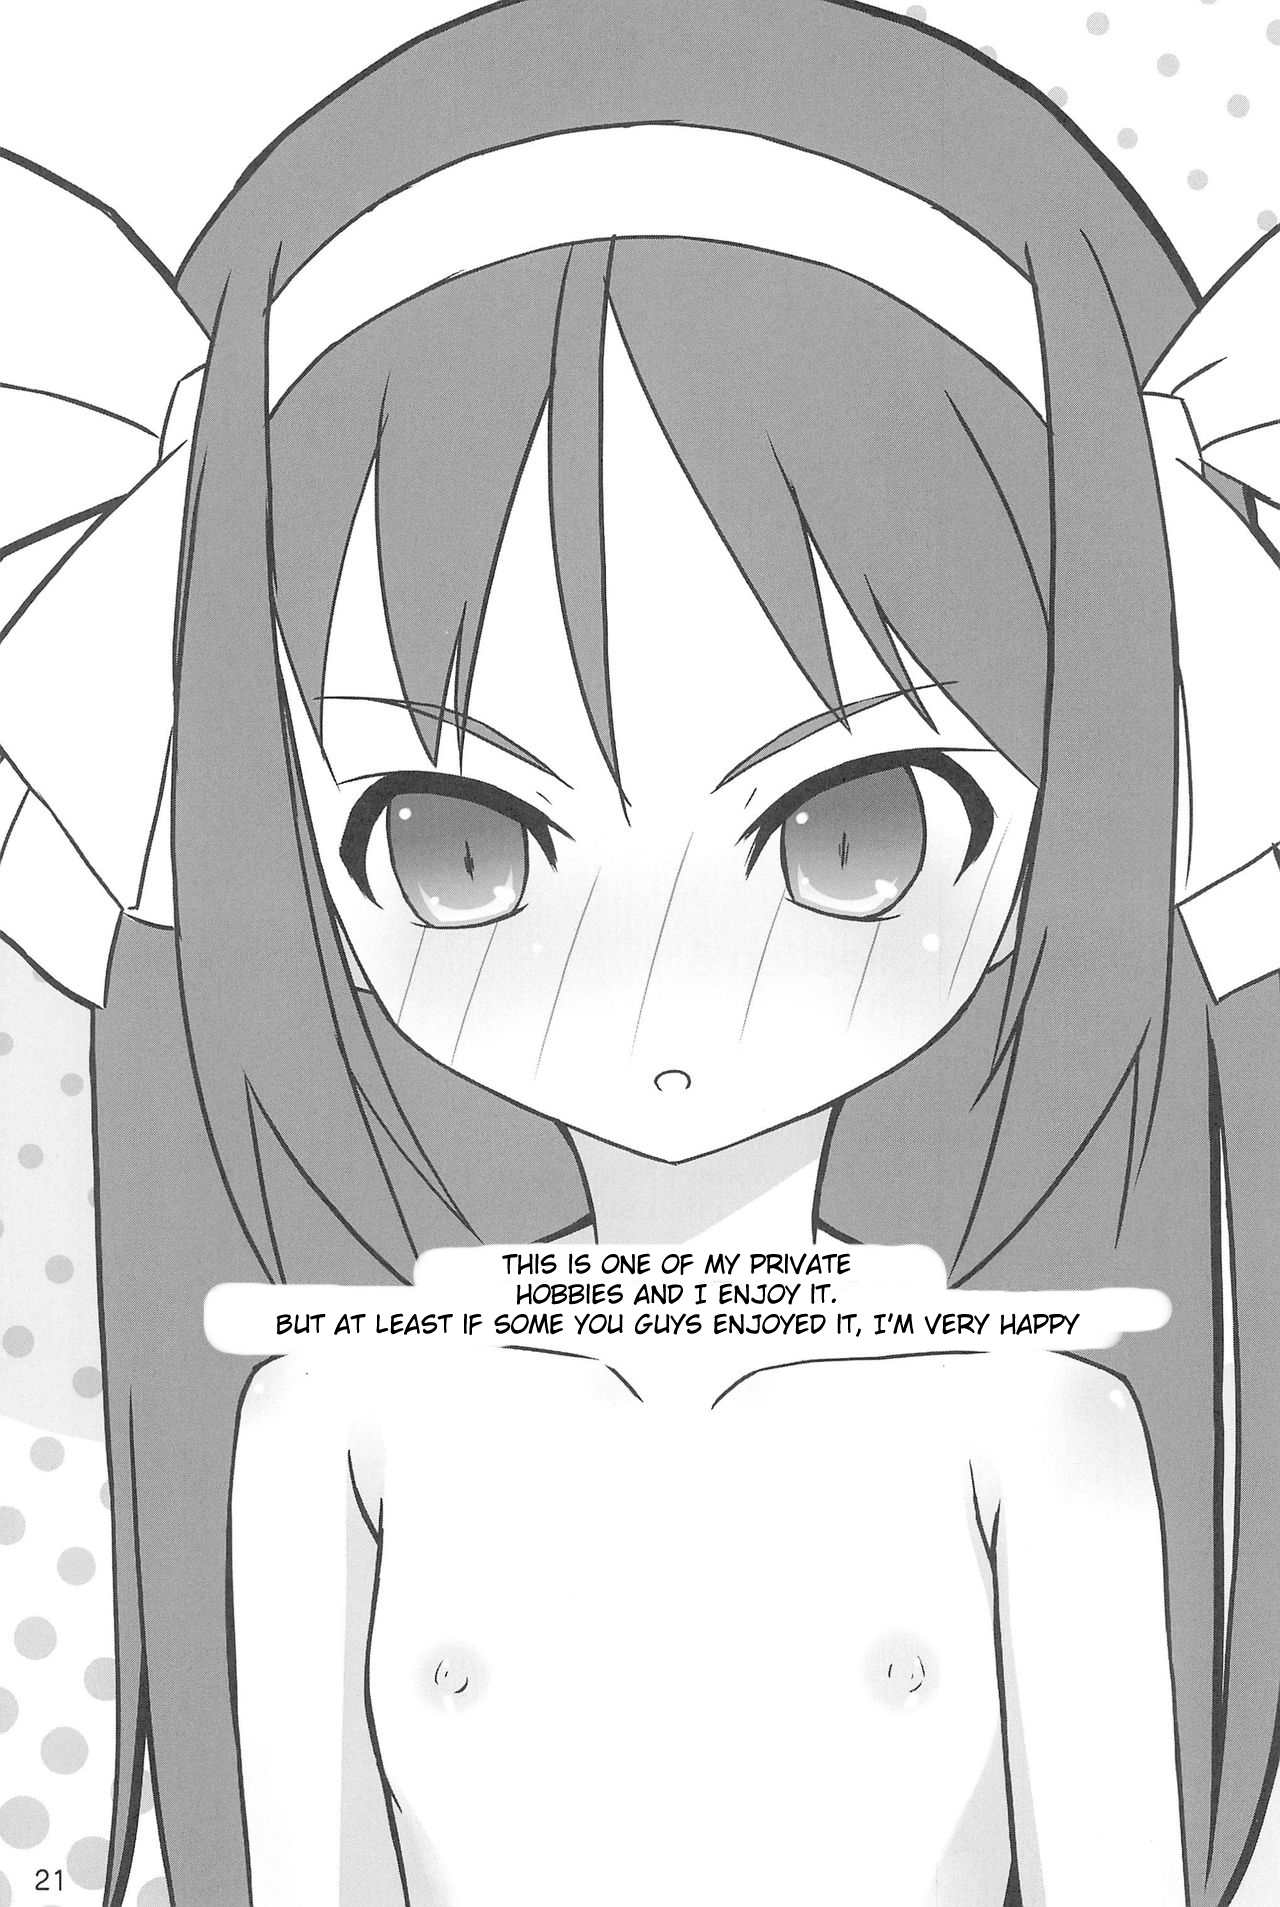 Tiny Angel Collection 3 hentai manga picture 21